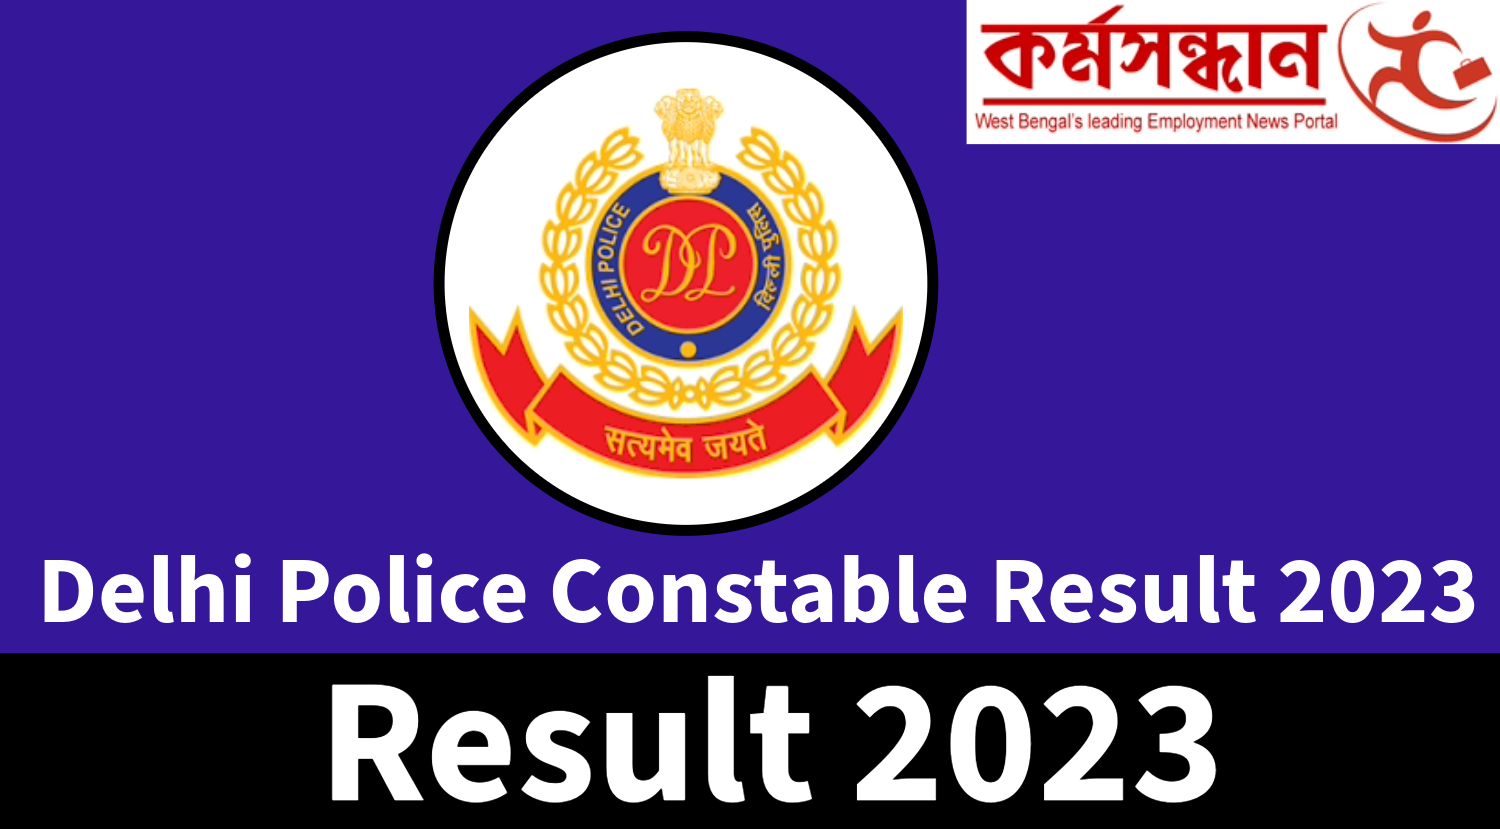 Delhi Police Constable Final Cut Off 2023-24 Out, Category-wise Cut off